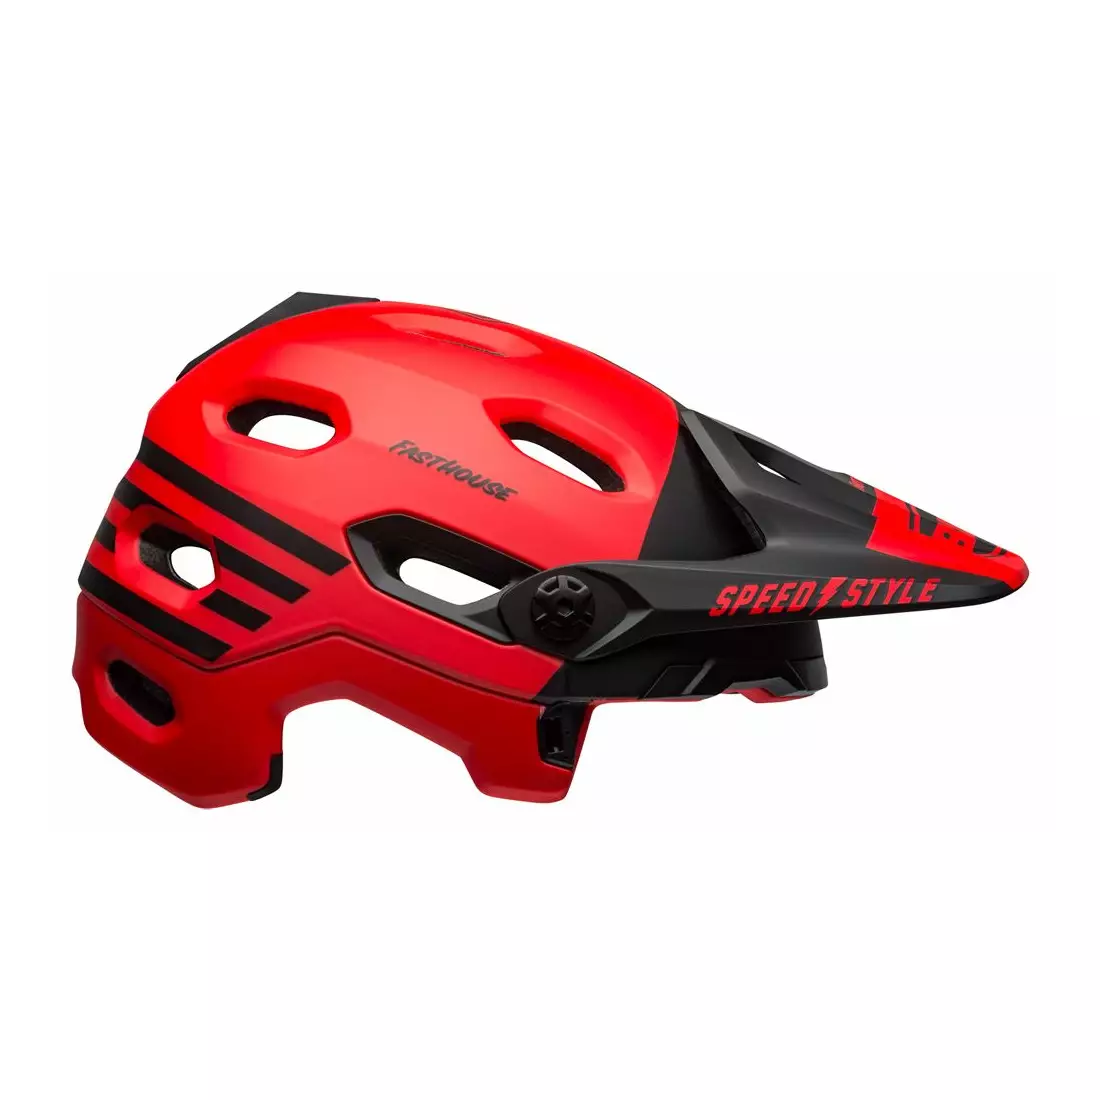 BELL SUPER DH MIPS SPHERICAL full face bicycle helmet, fasthouse matte gloss red black